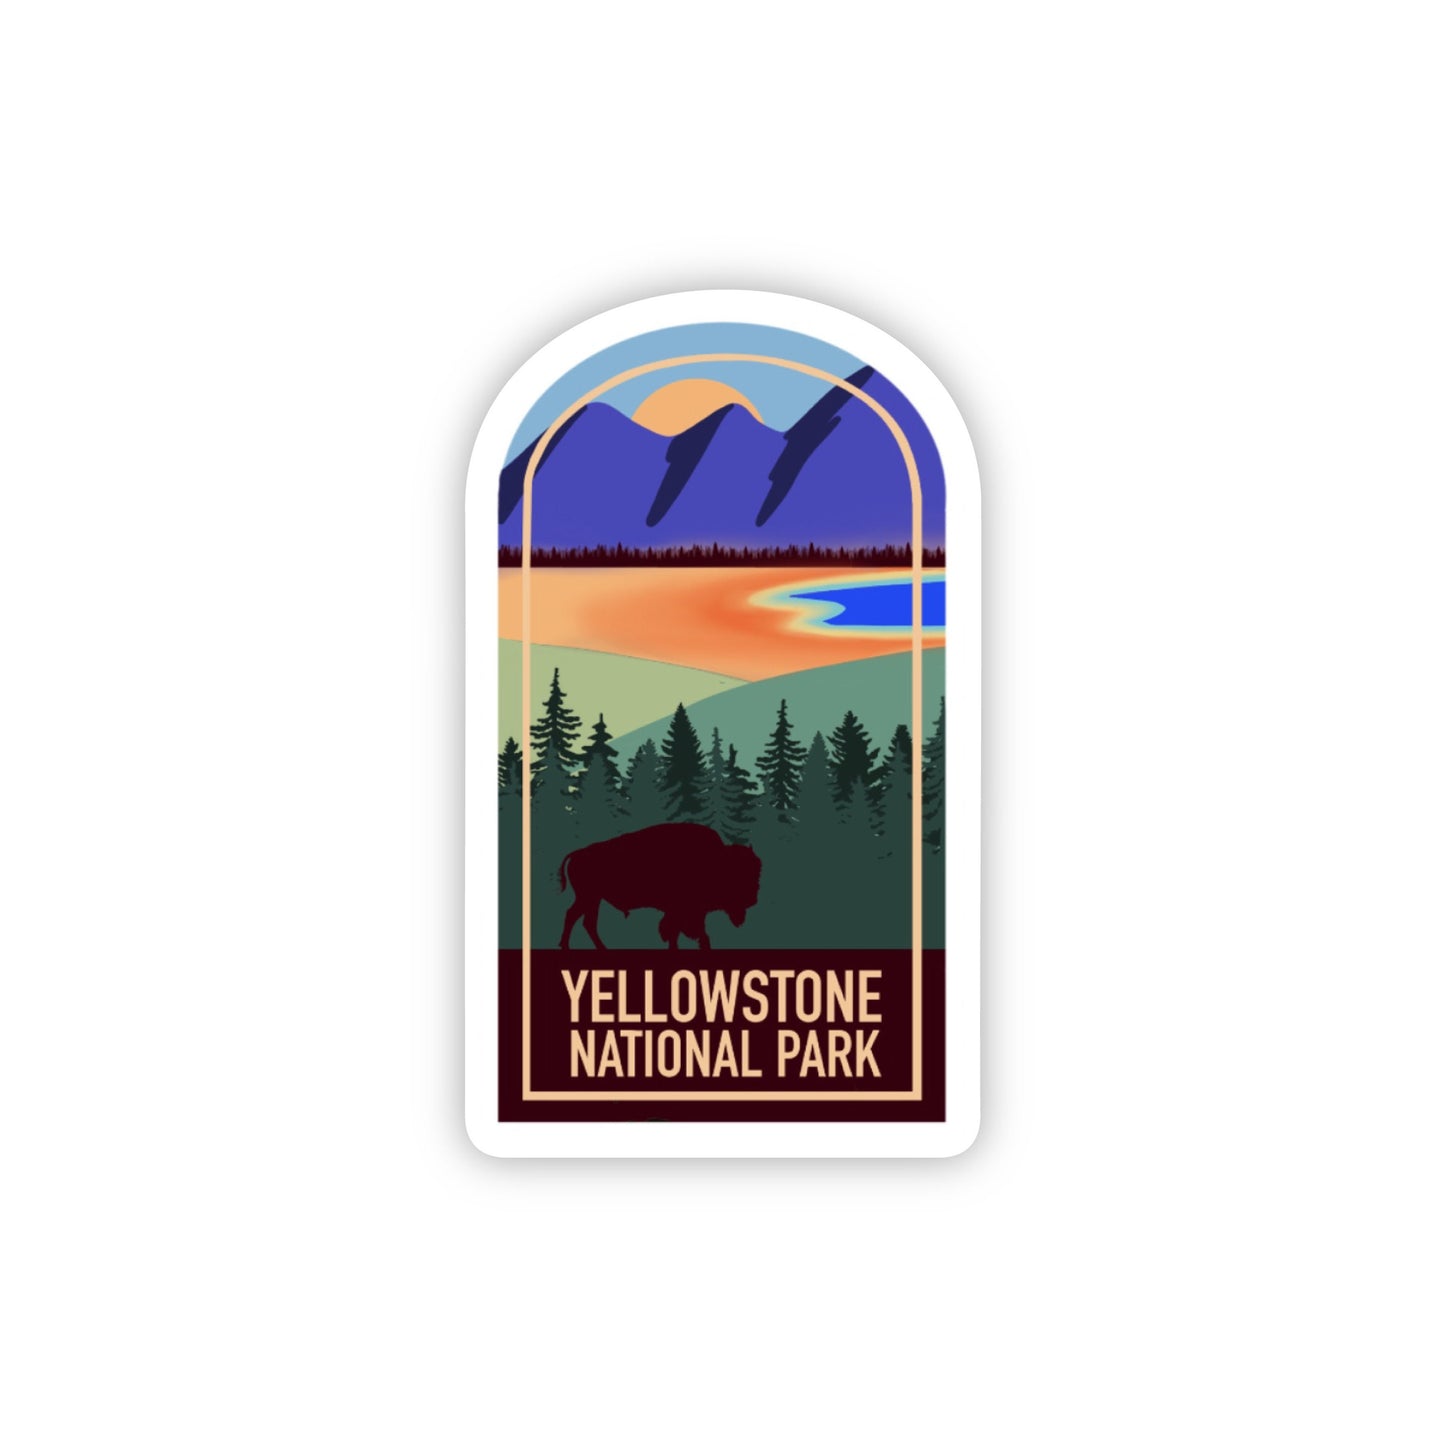 Yellowstone National Park stickers, National Parks stickers, 3x3in. Vinyl stickers perfect for Water Bottles, Bullet Journals, Laptops, etc.